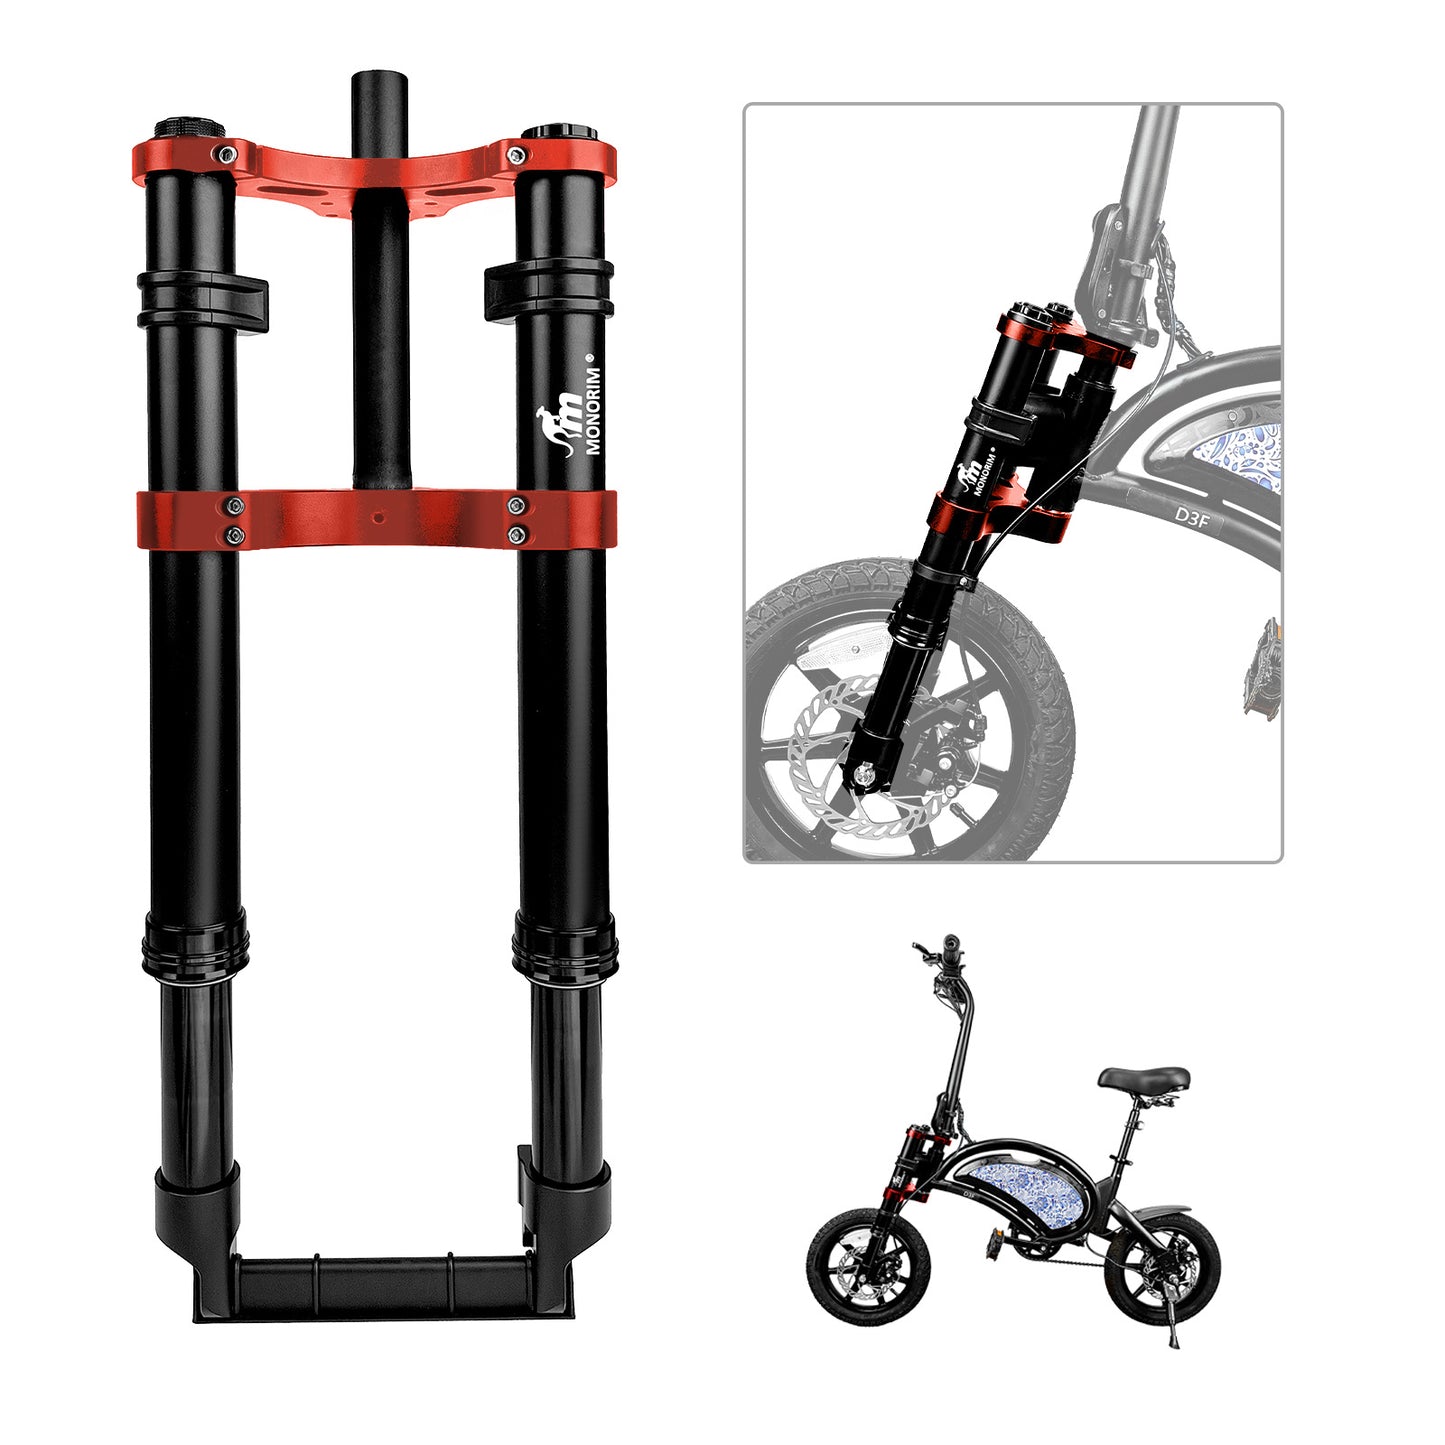 Monorim MD0-14inch front suspension modify great kit to be more safety and comfort for DYU D3+/ D3F ebike ：